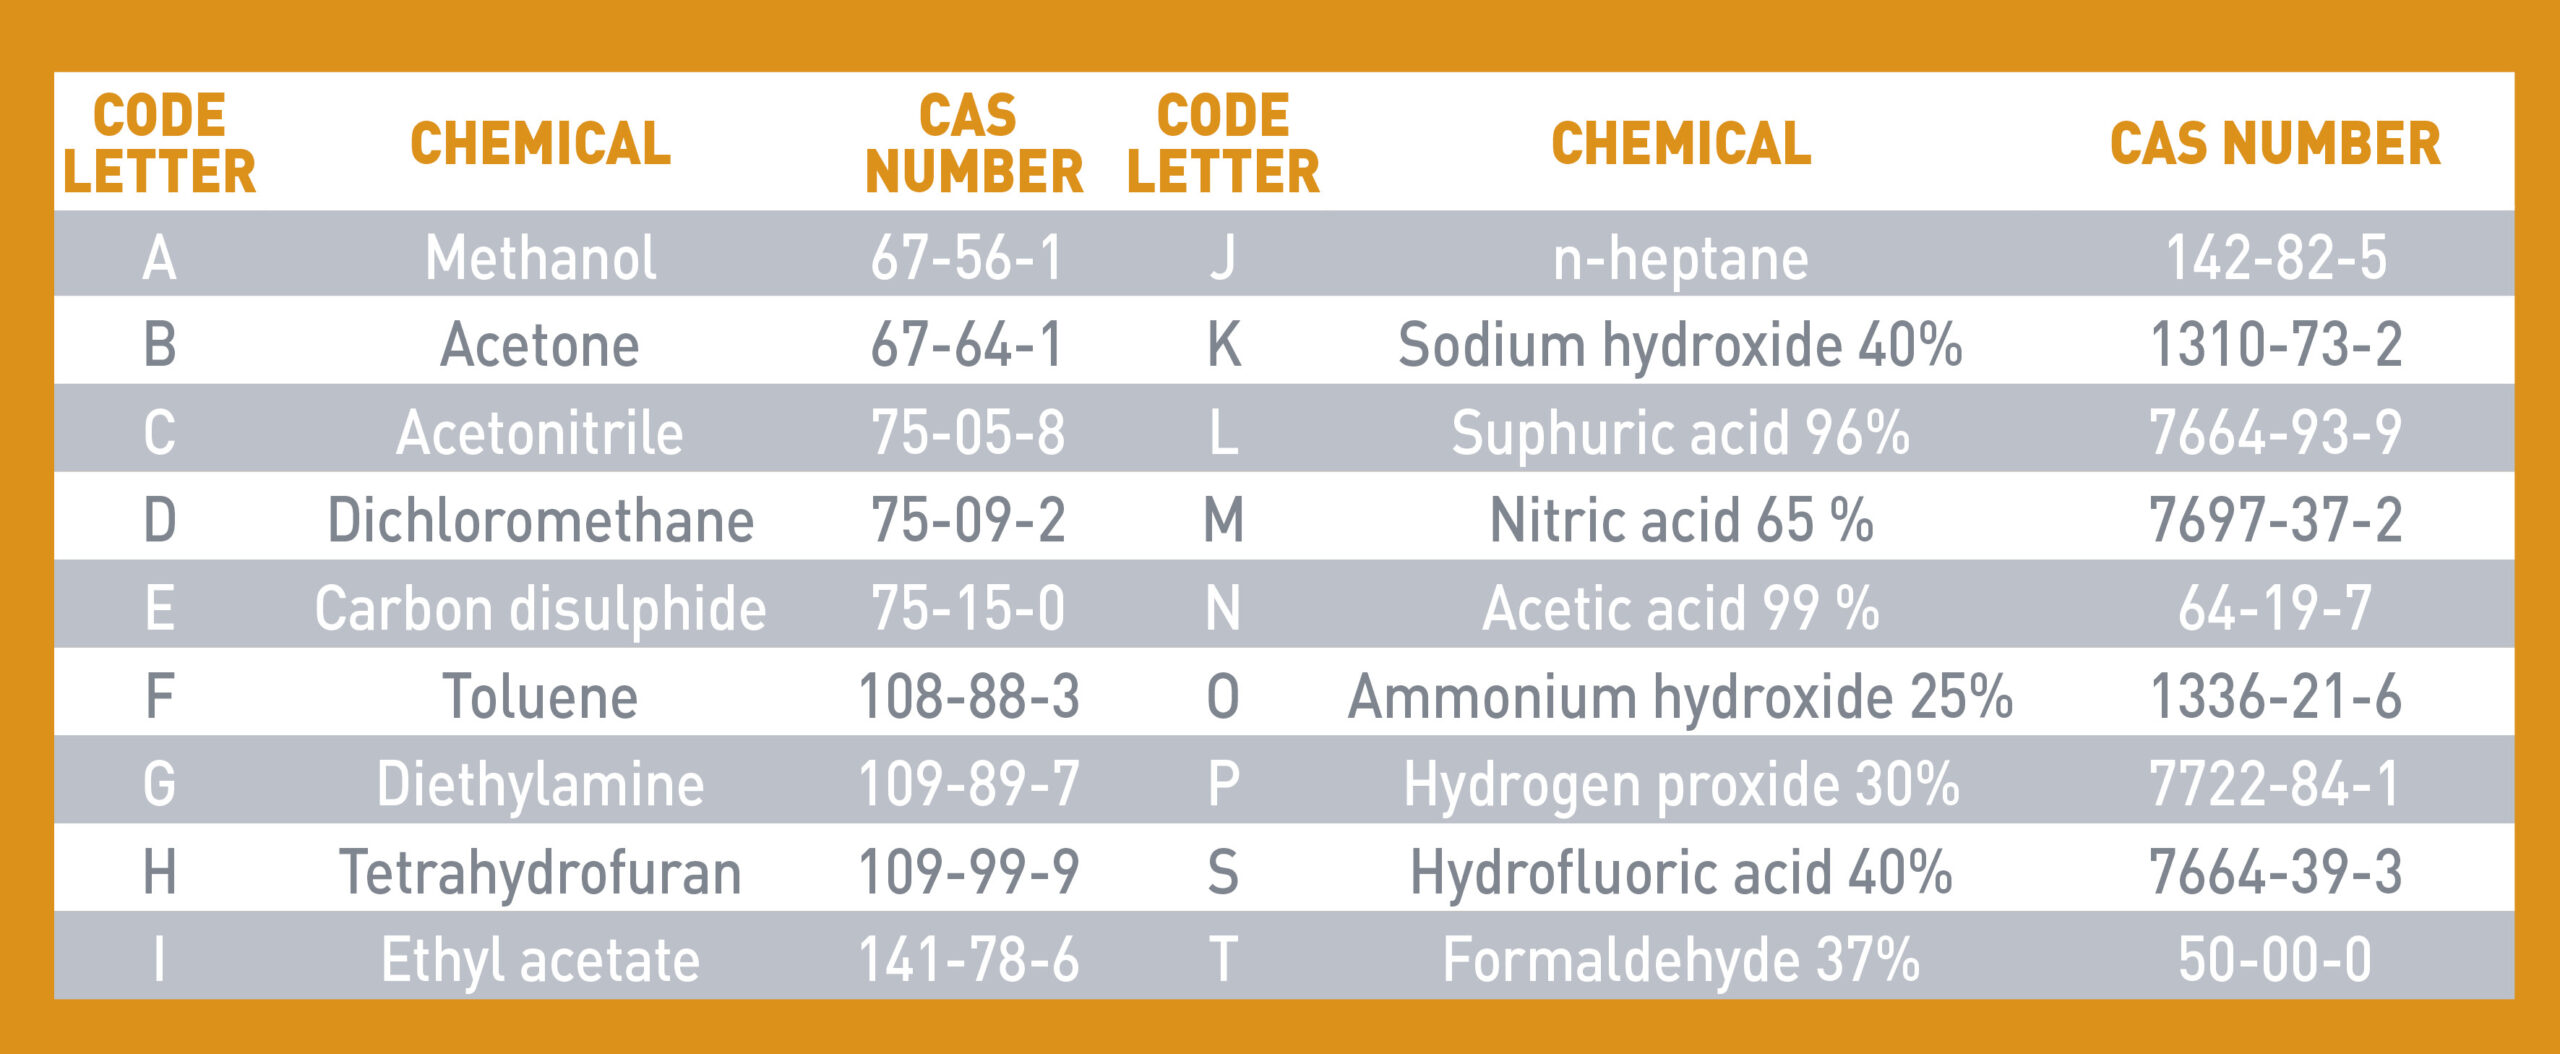 Table of the ISO 374-1:2016+A1:2018 18 chemical and code letter list 